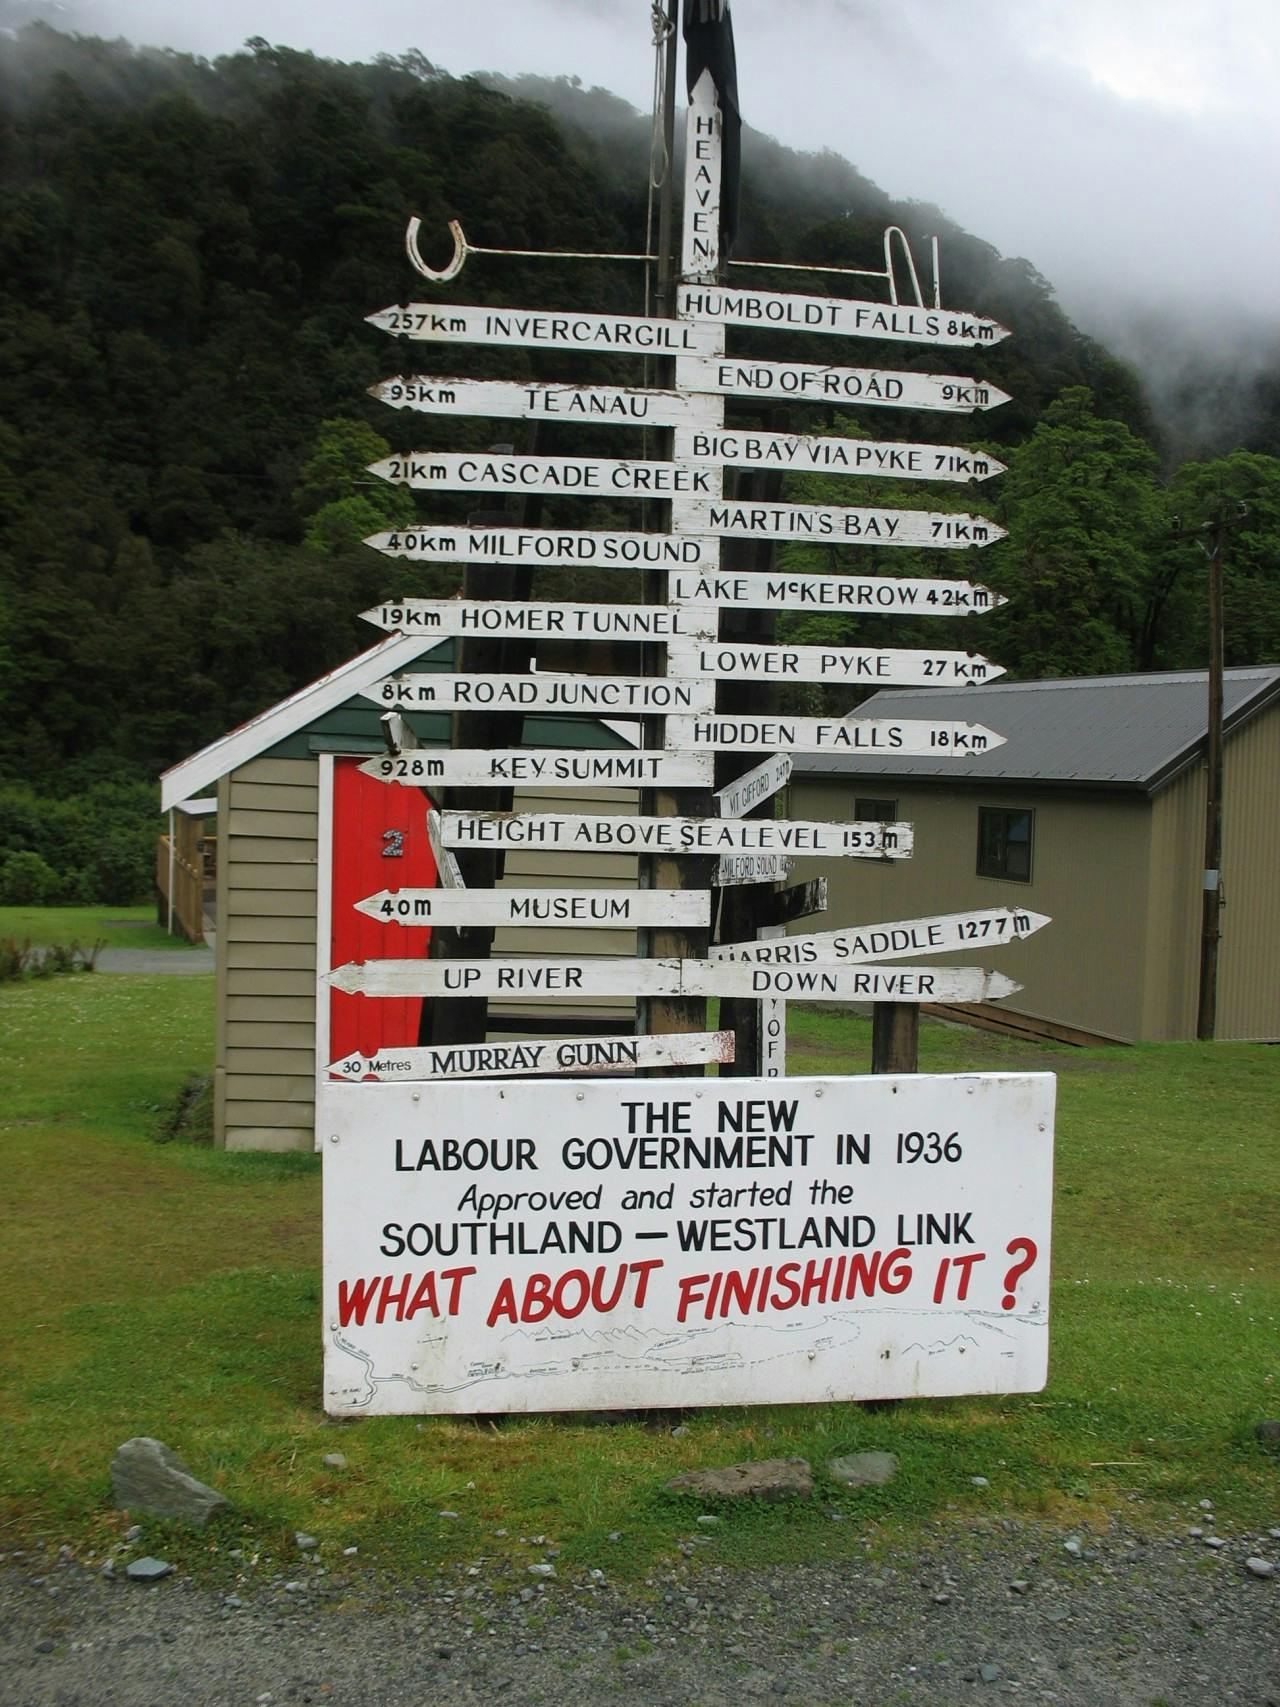 The Gunn's Camp signpost shows the way to Martins Bay and Heaven. PHOTO: Paul Rush